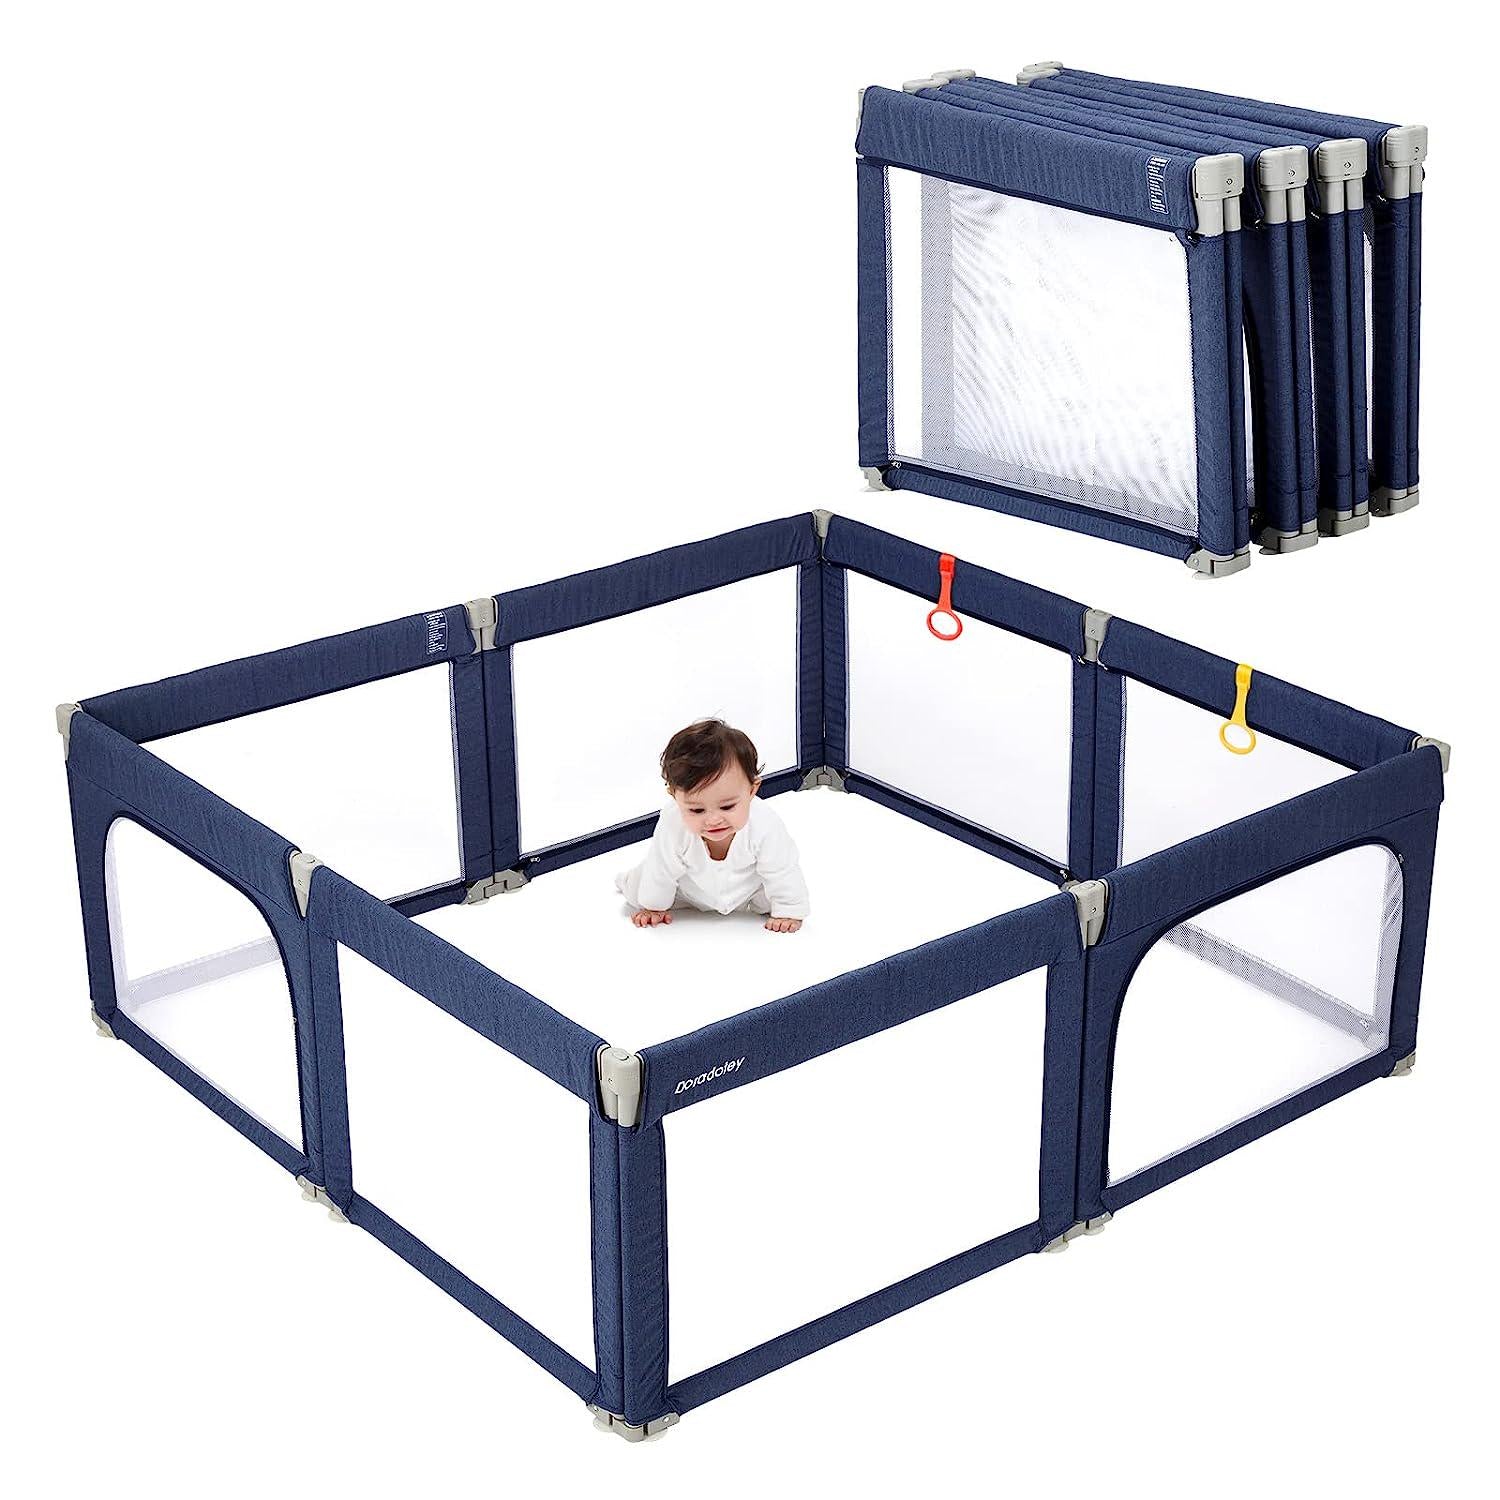 Doradotey Baby Playpen, Shape and Size Adjustable Large Play Center Yards Play Pens for Babies, Foldable Infant Playpen Baby Fence Play Yard Safety Toddler Playpen(Navy Blue)-